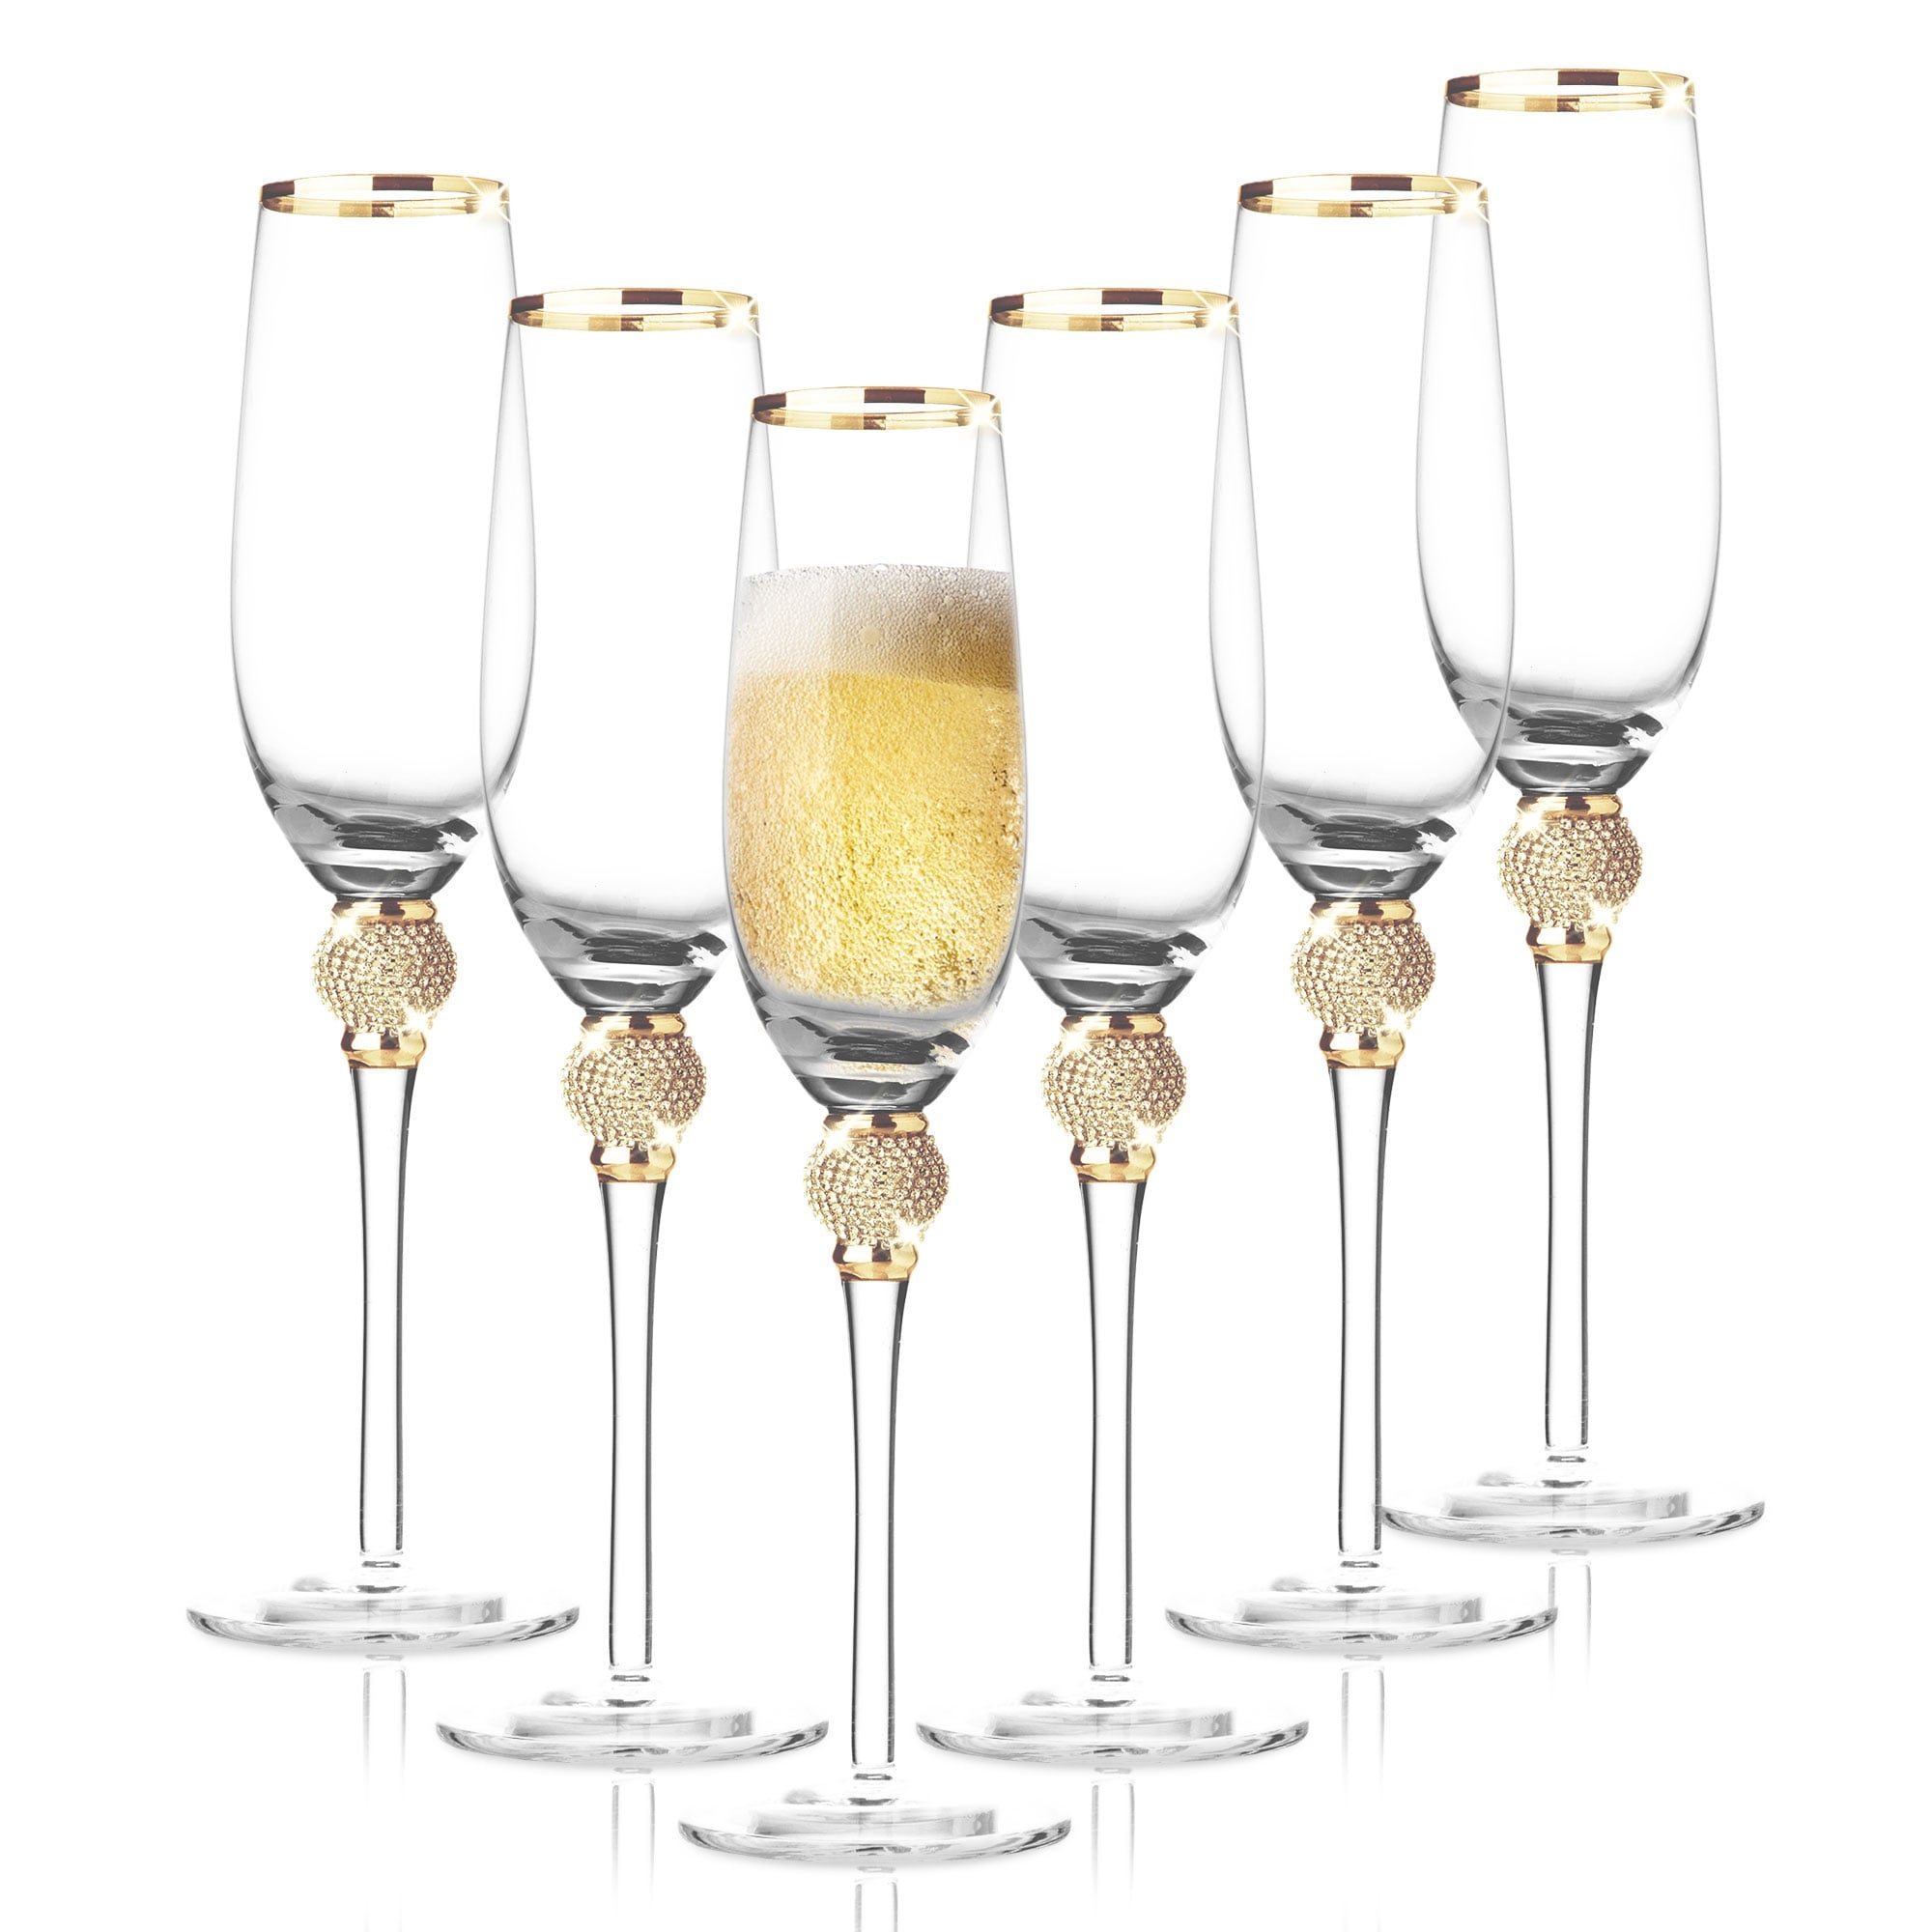 https://ak1.ostkcdn.com/images/products/is/images/direct/7e427f872ae8d51e1283211ed7eb6fbb852ce1fb/Berkware-Crystal-Champagne-Glass-with-Gold-or-Silver-Rim.jpg